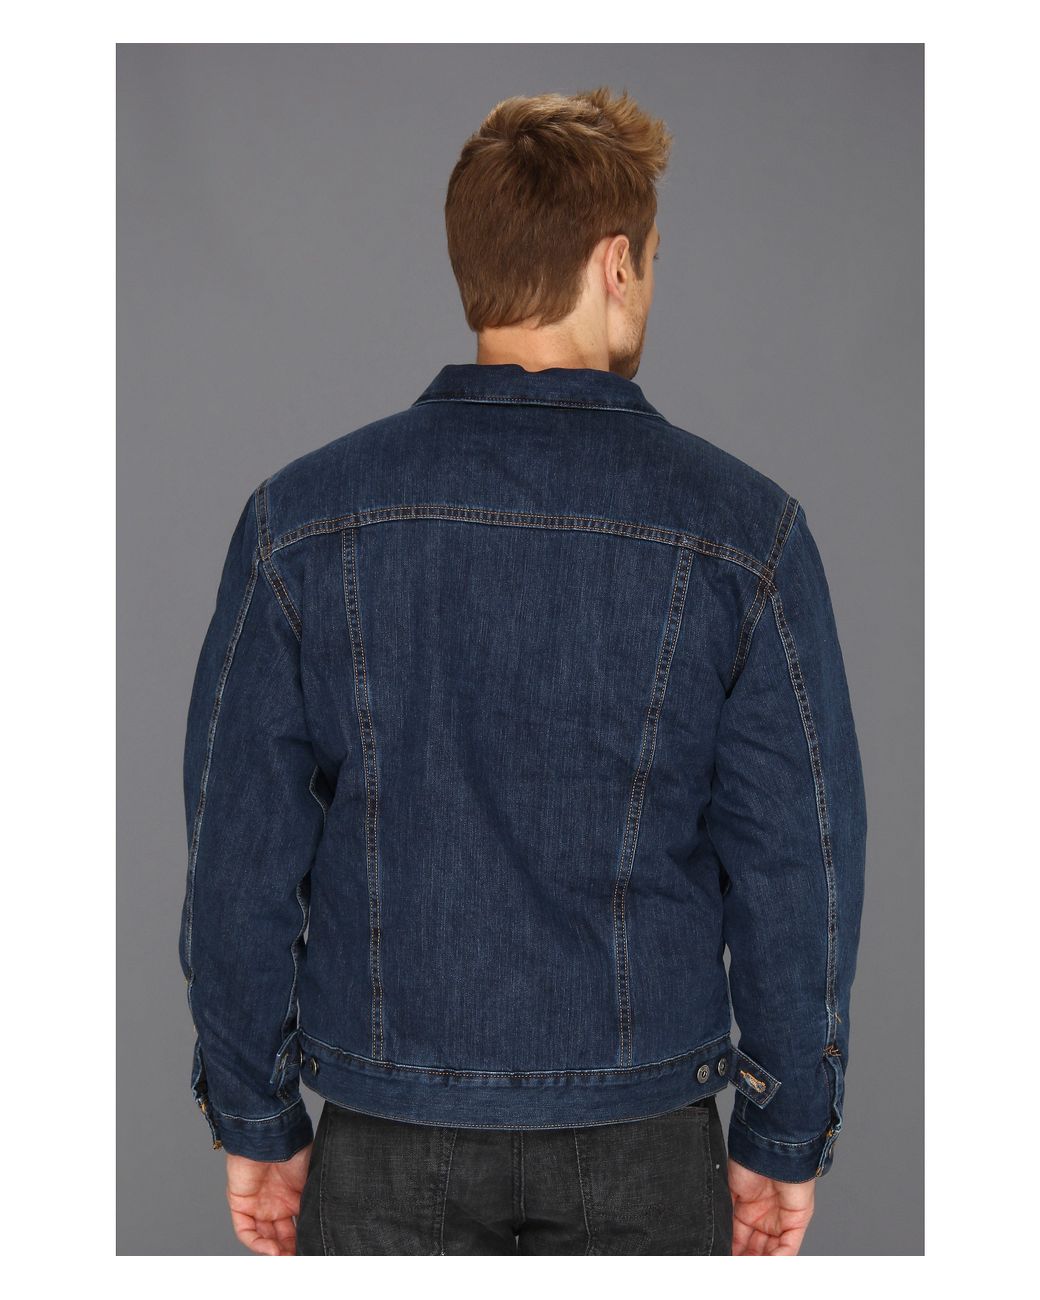 Carhartt Big And Tall Sherpa Lined Denim Jean Jacket In Blue For Men Lyst